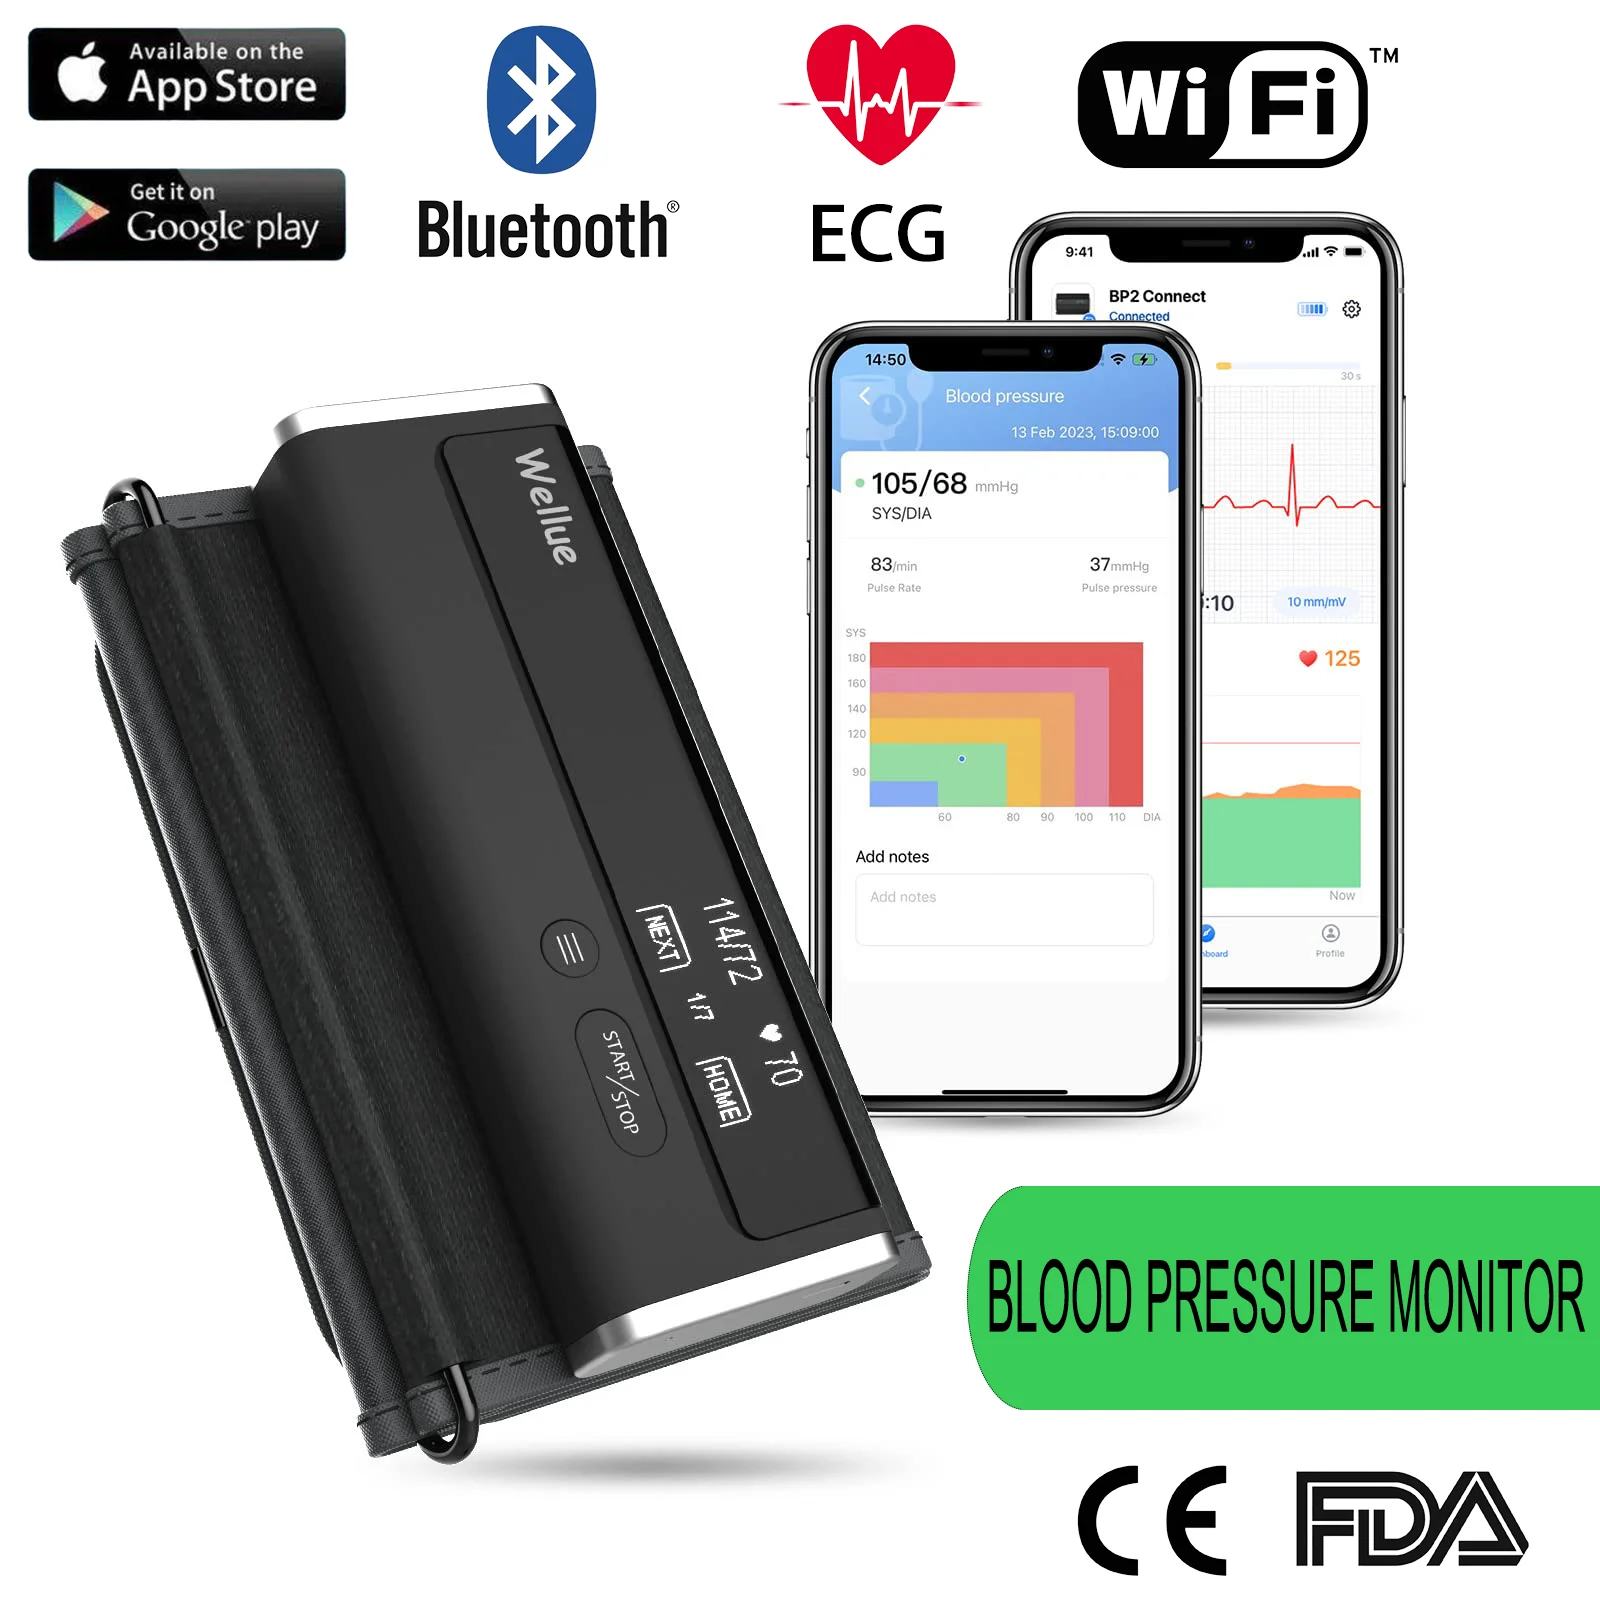 

Checkme Bluetooth & WiFi Blood Pressure Monitor Automatical Upper Arm BP Monitor with ECG AI Analysis Medical Sphygmomanometer